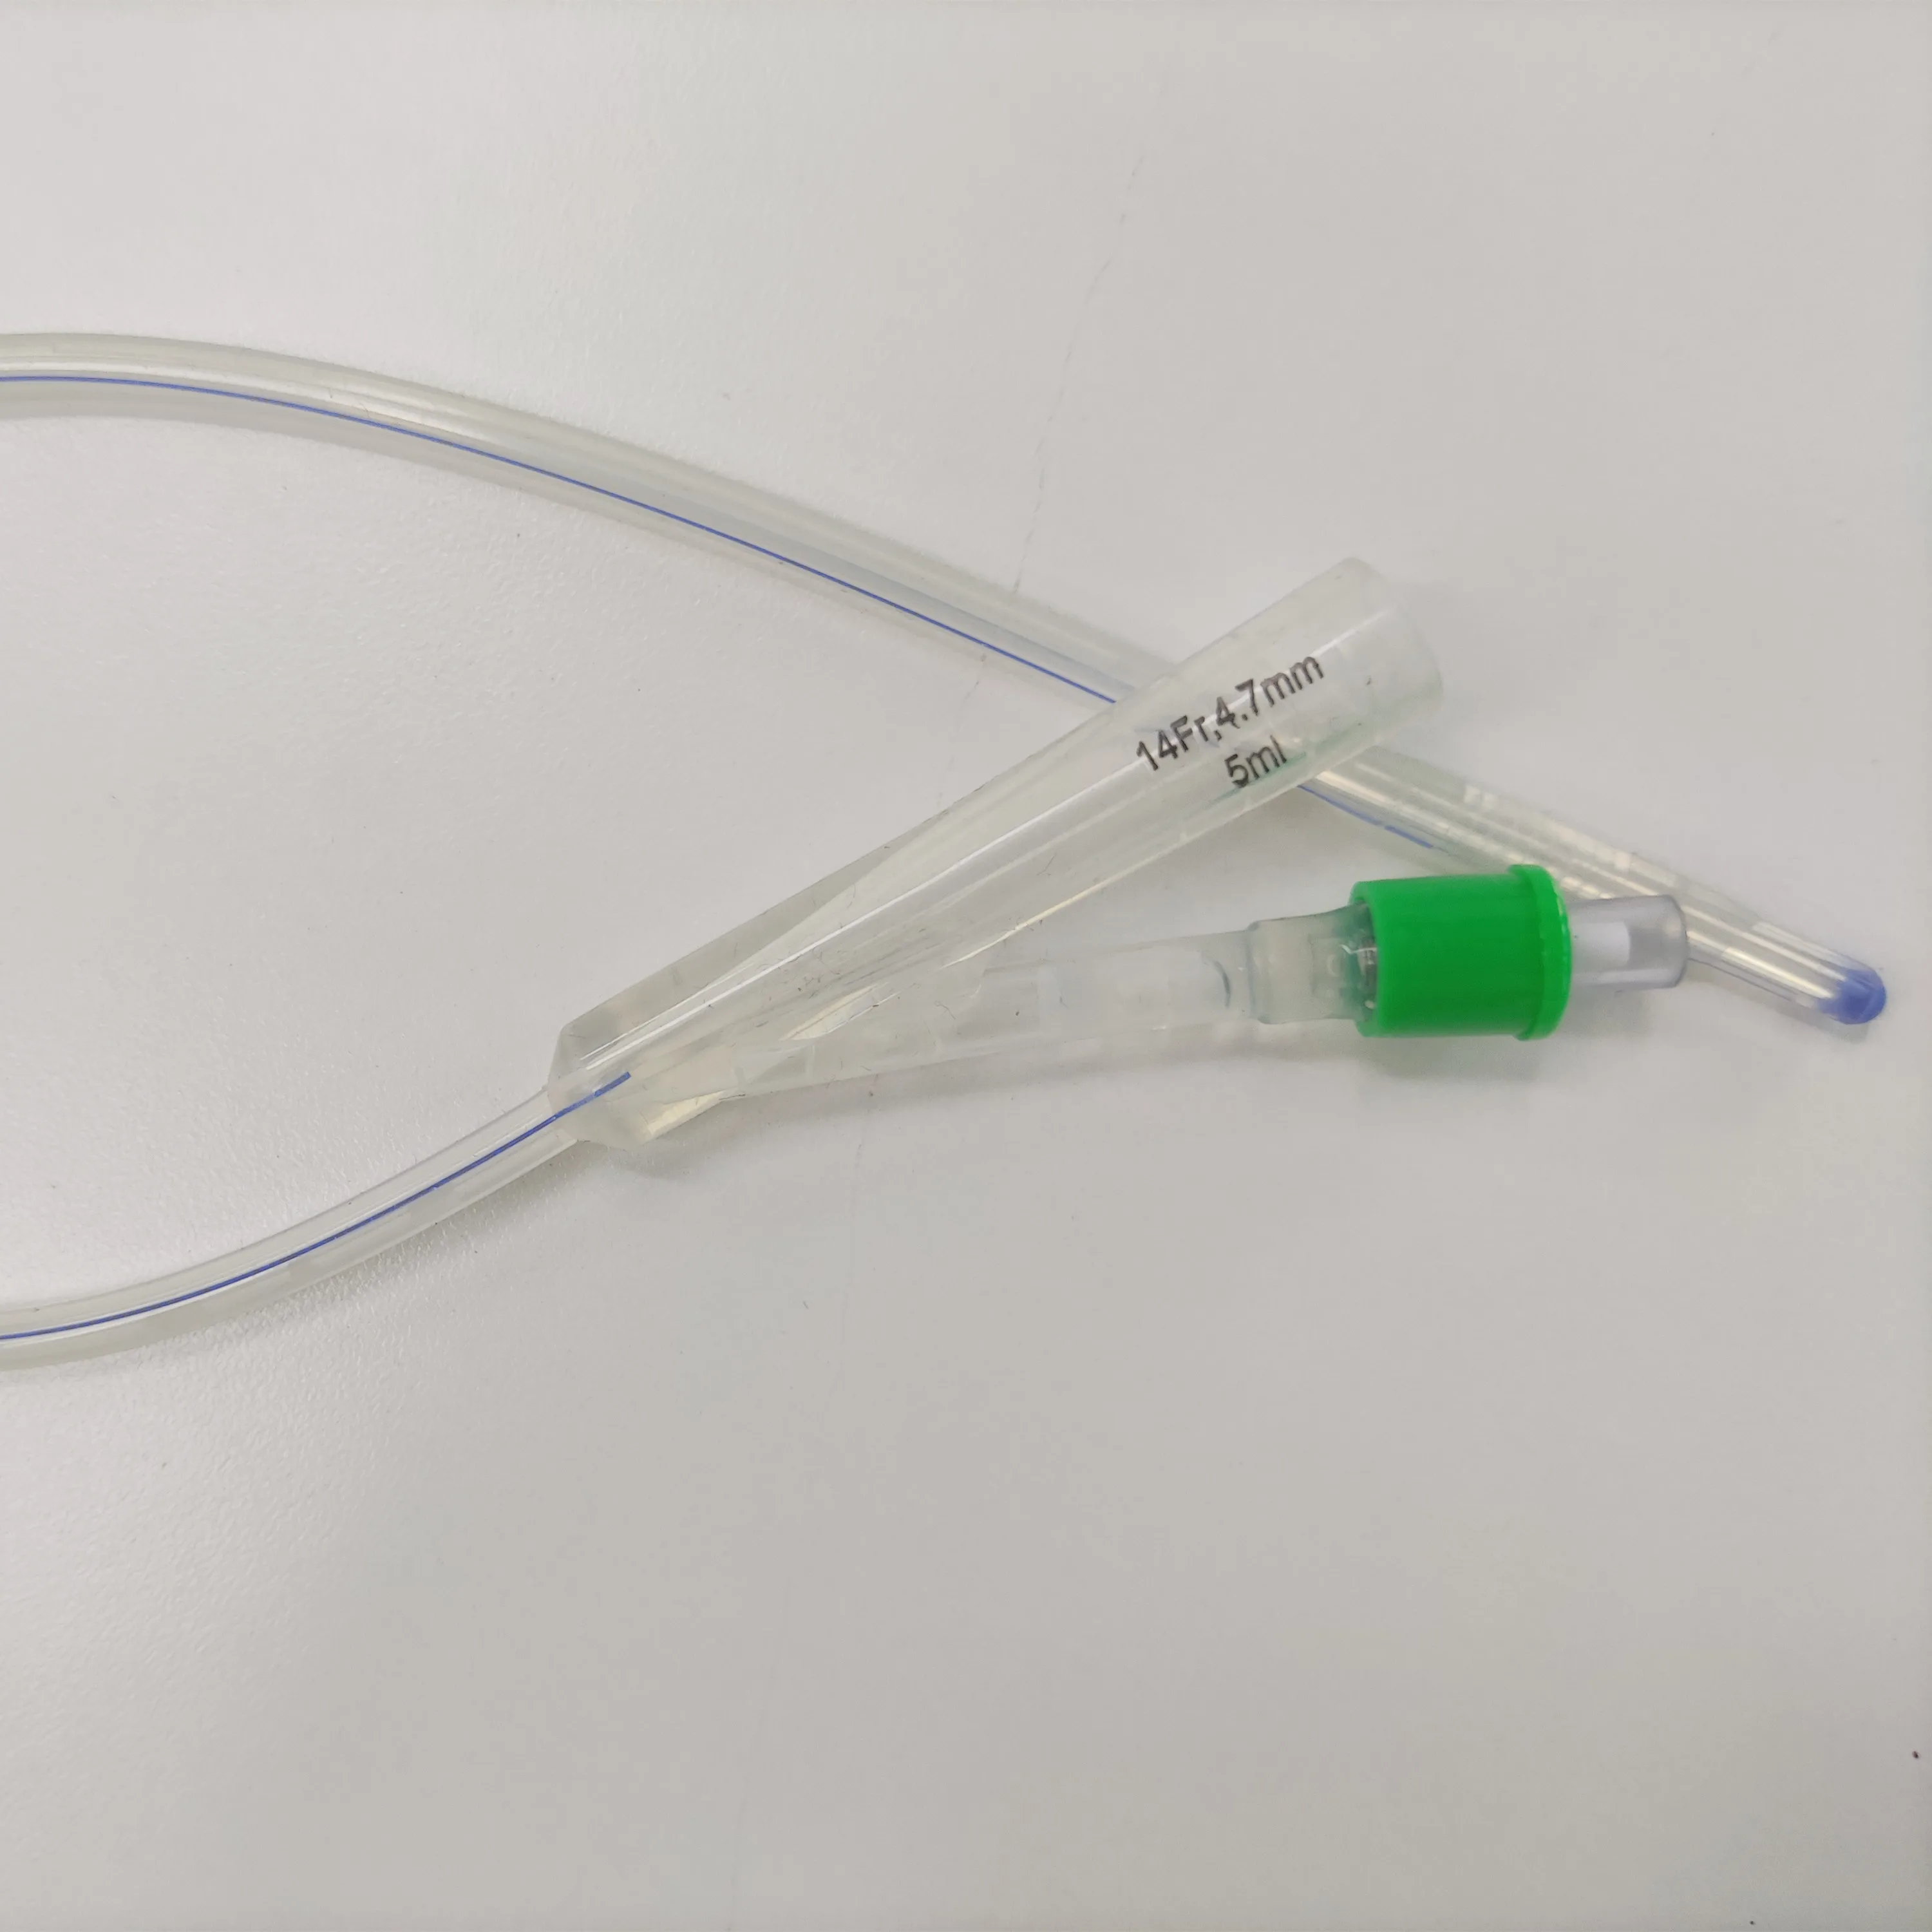 factory price silicone Foley catheter produced by China manufacturer with all medical grade silicone high quality